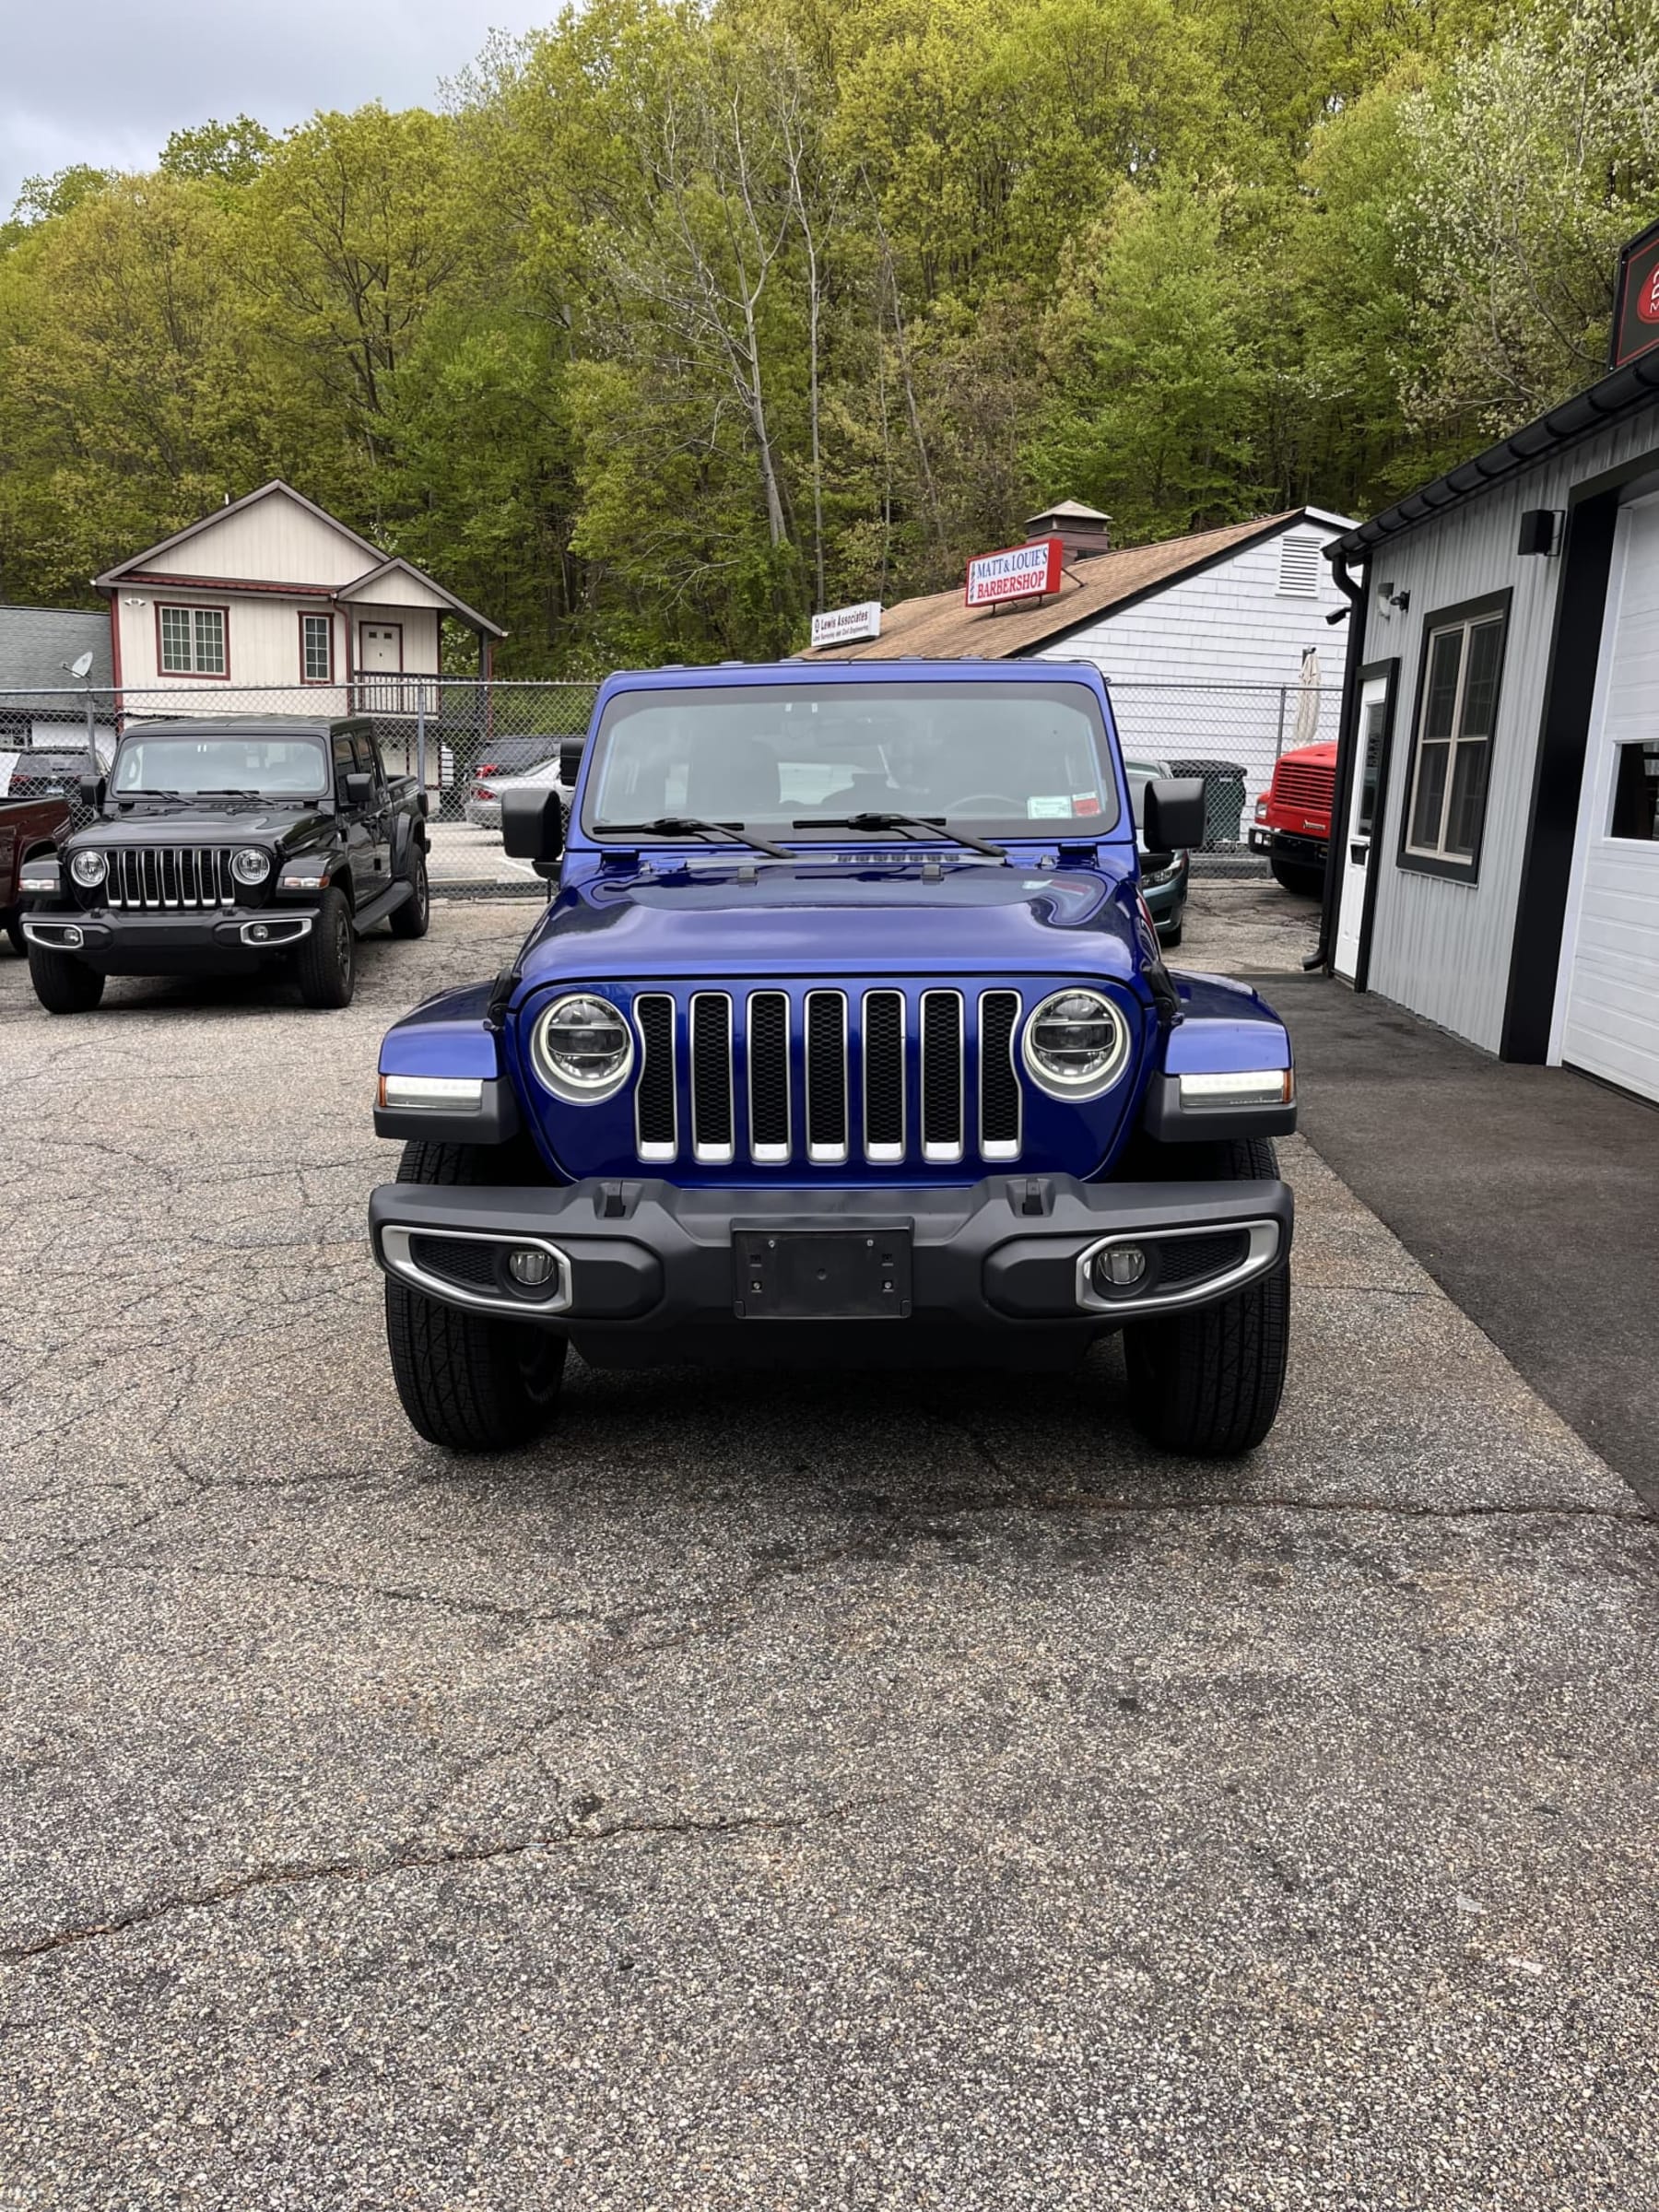 NEW ARRIVAL!! 2018 Jeep Unlimited Sahara!! Clean carfax! 78,700 miles! With an original window sticker of $52,300 this Jeep is LOADED! Heated Leather Seats, Heated Steering Wheel, Navigation, Backup Camera, Remote Start, Keyless Entry, Body Color Freedom Hardtop, Soft Top, Jeep Active Safety Group, LED Lighting Group, Alpine Premium Audio System and more!! It’s a steal at only $28,900!!